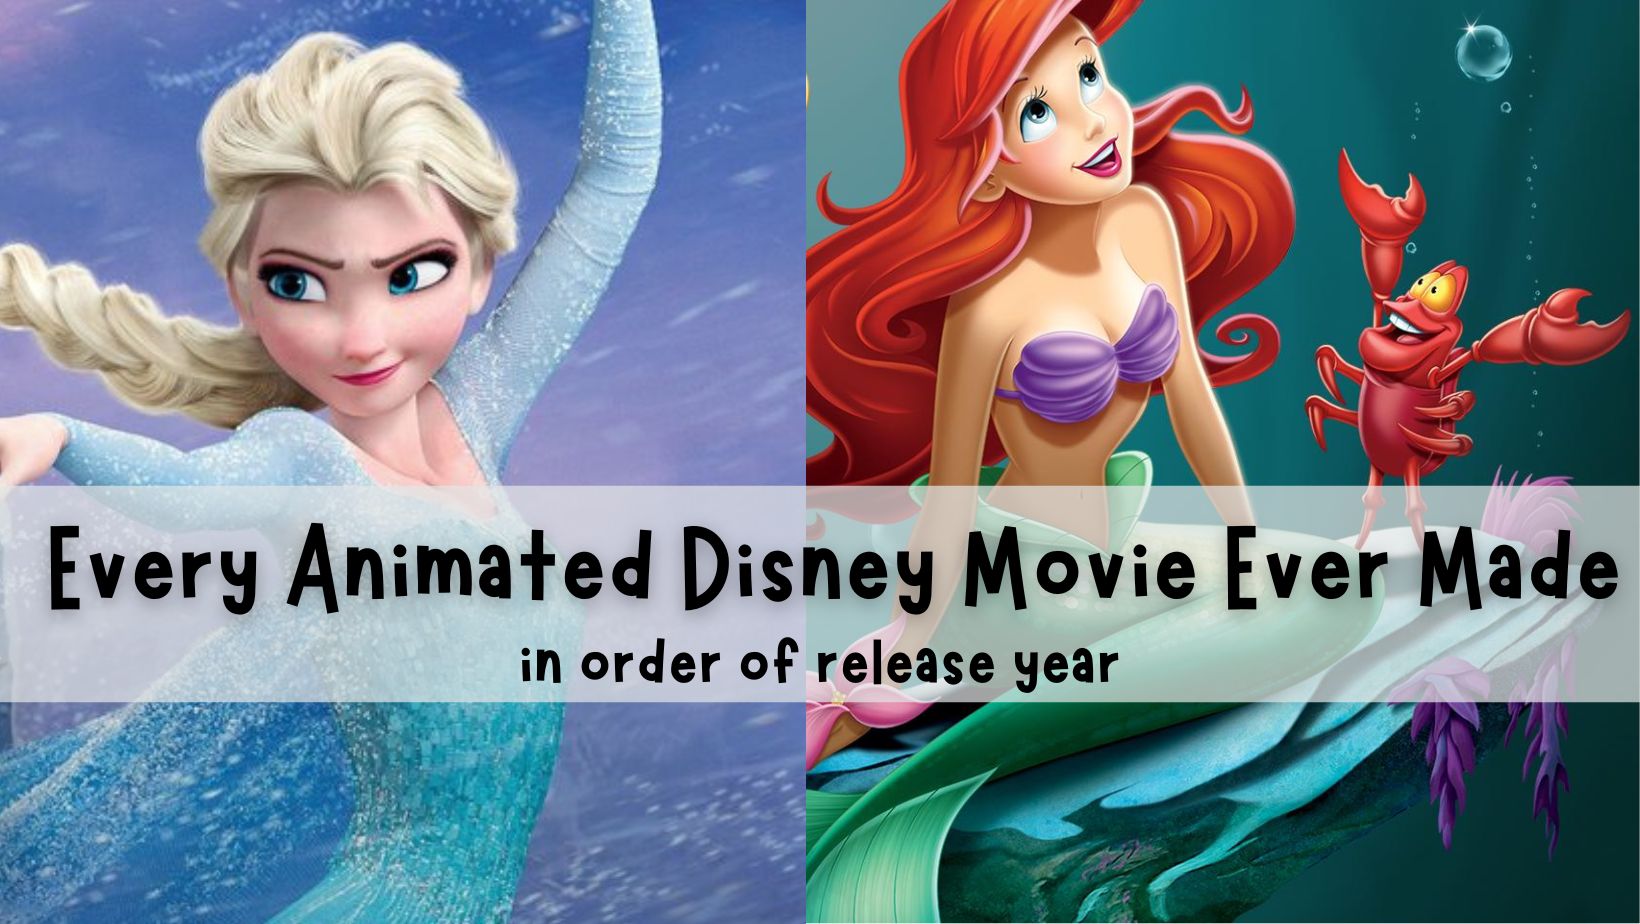 image from Disneys "the little mermaid" and "frozen". text "every animated disney movies ever made in order of release year"